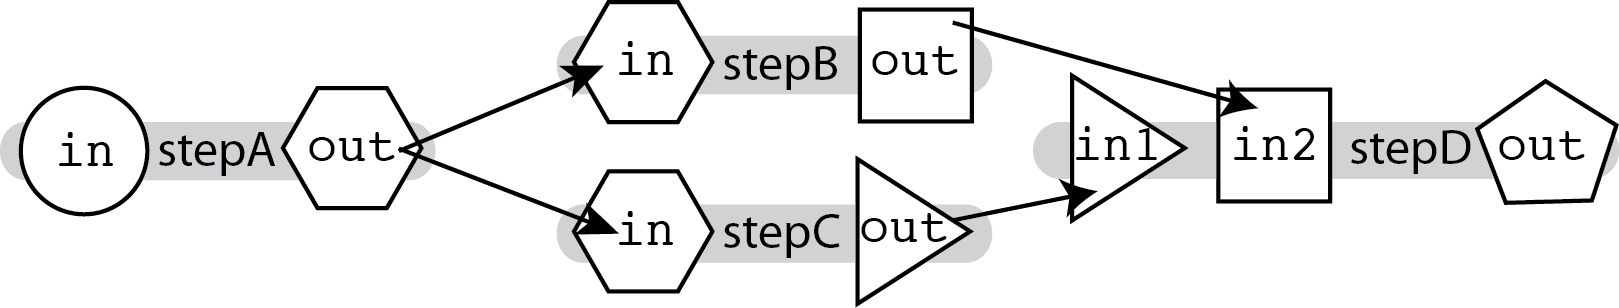 Diagram depicting the flow of data in a workflow with branching paths that merge back together. The output from step A is used as the input for steps B and C, and the outputs from steps B and C are used as the inputs for step D.